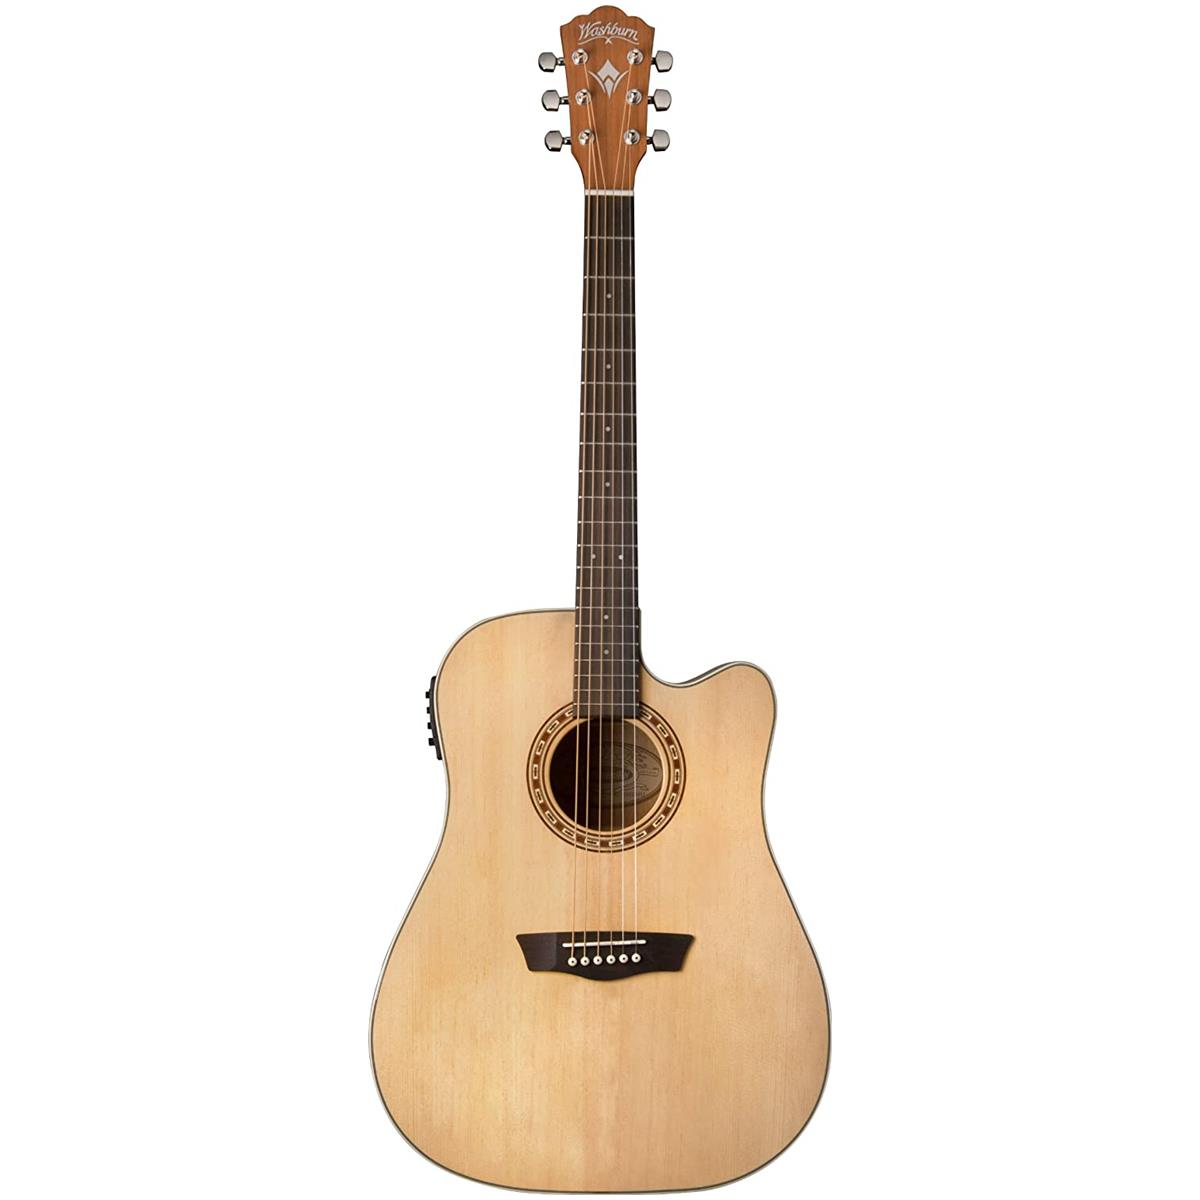 Washburn Harvest Series D7SCE Dreadnought Acoustic Electric Guitar, Natural -  WD7SCE-A-U